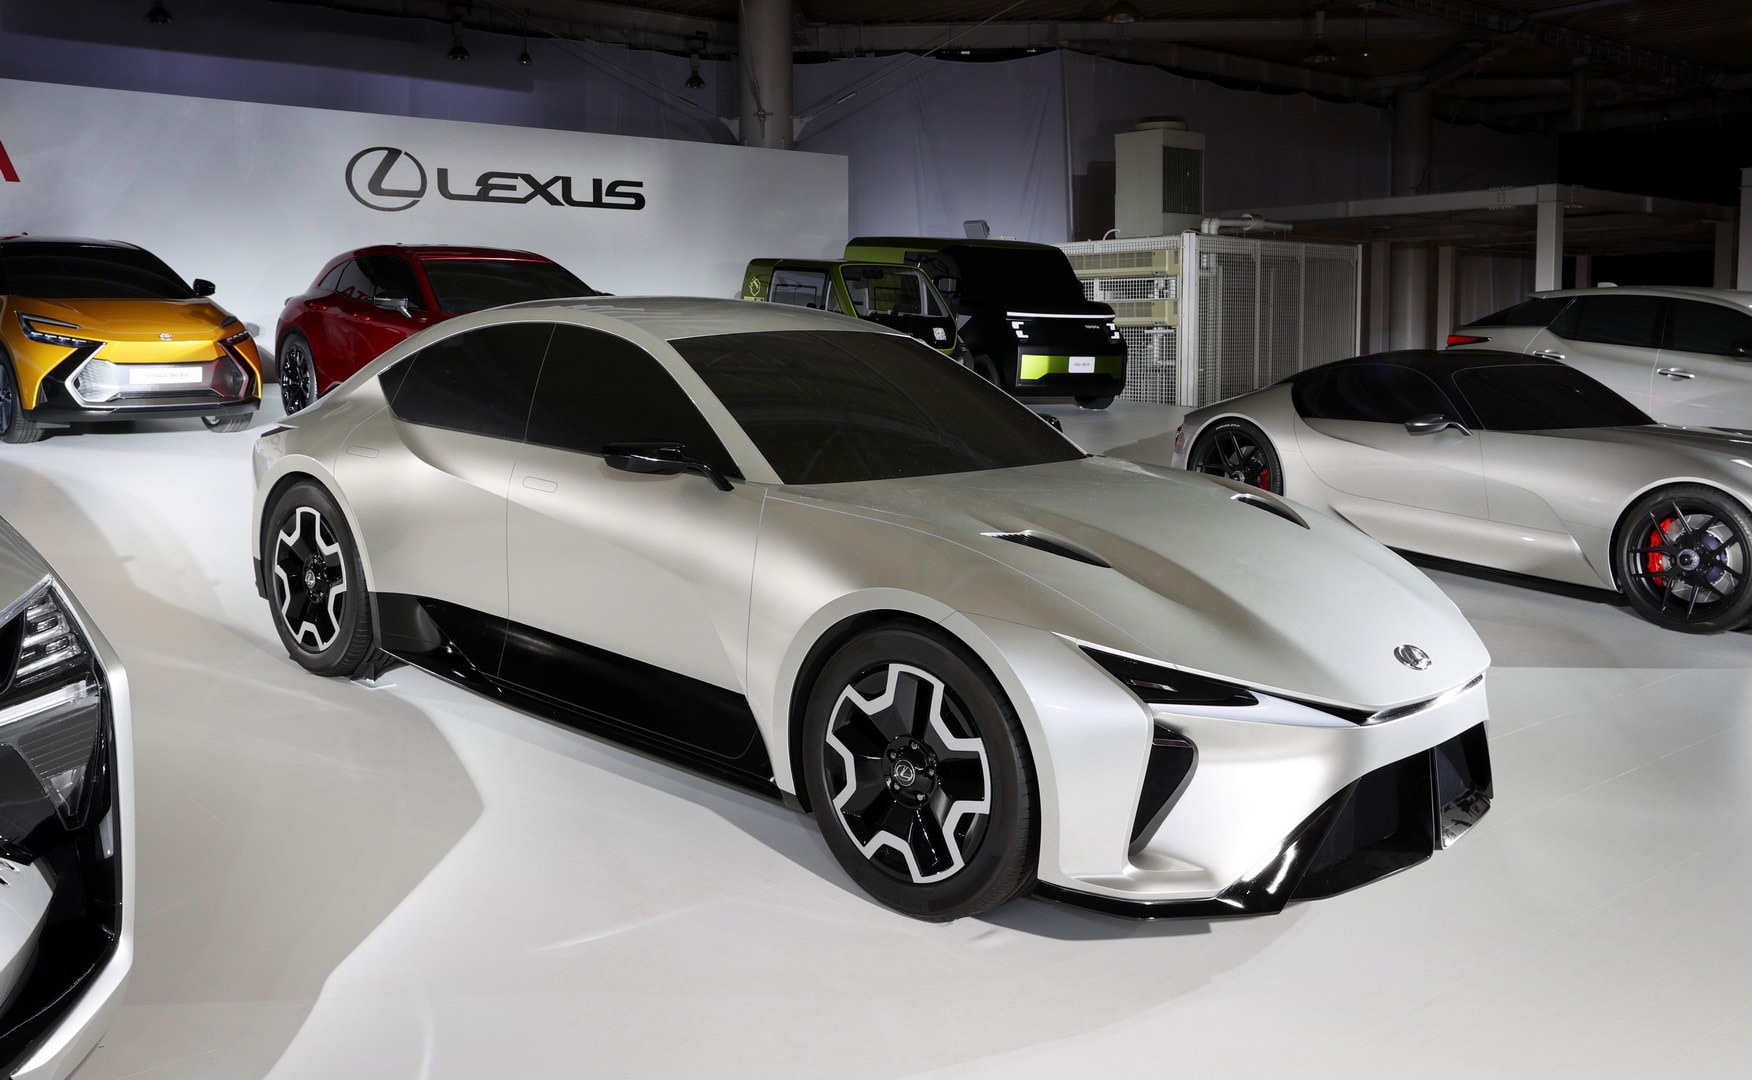 lexus-unveils-electric-sedan-concept-and-its-giving-off-some-really-cool-anime-vibes-176513_1.jpg